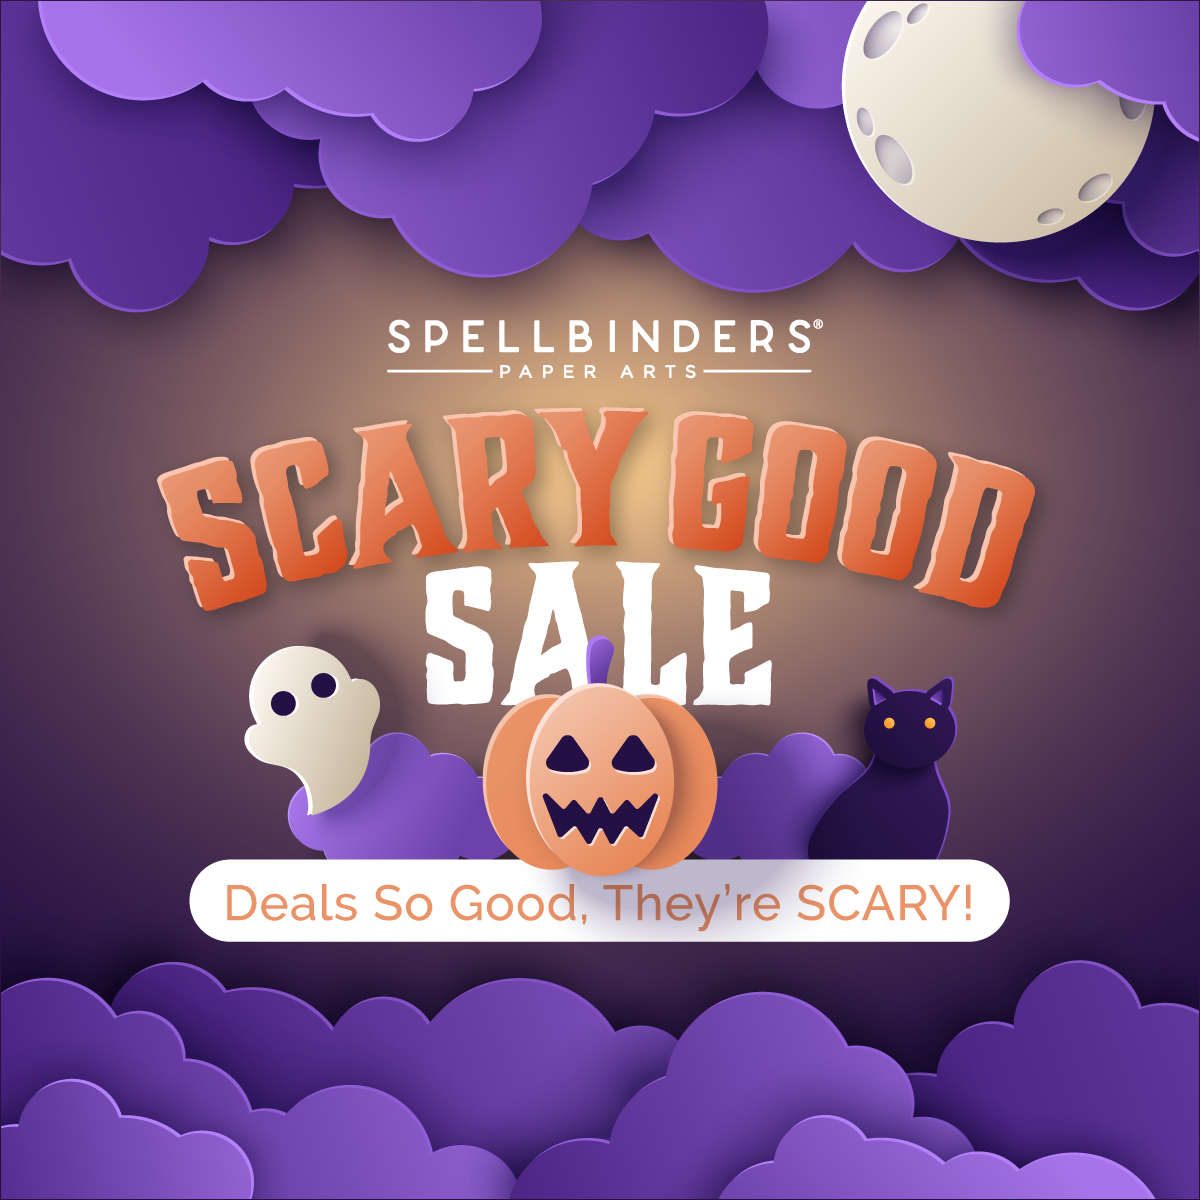 Scary Good Sale